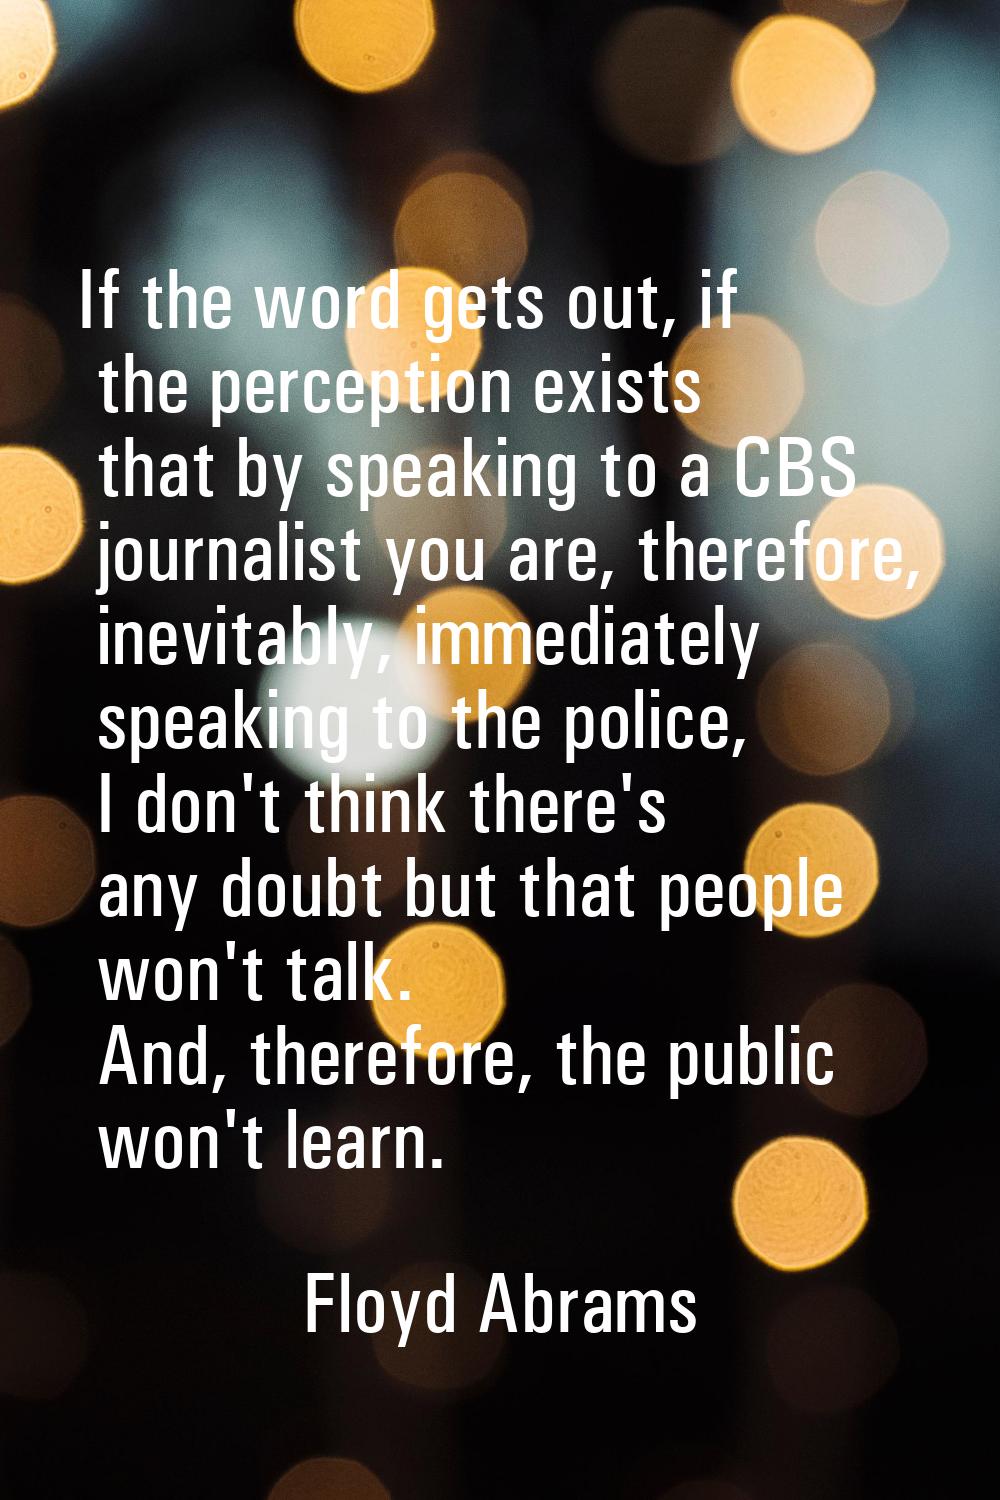 If the word gets out, if the perception exists that by speaking to a CBS journalist you are, theref